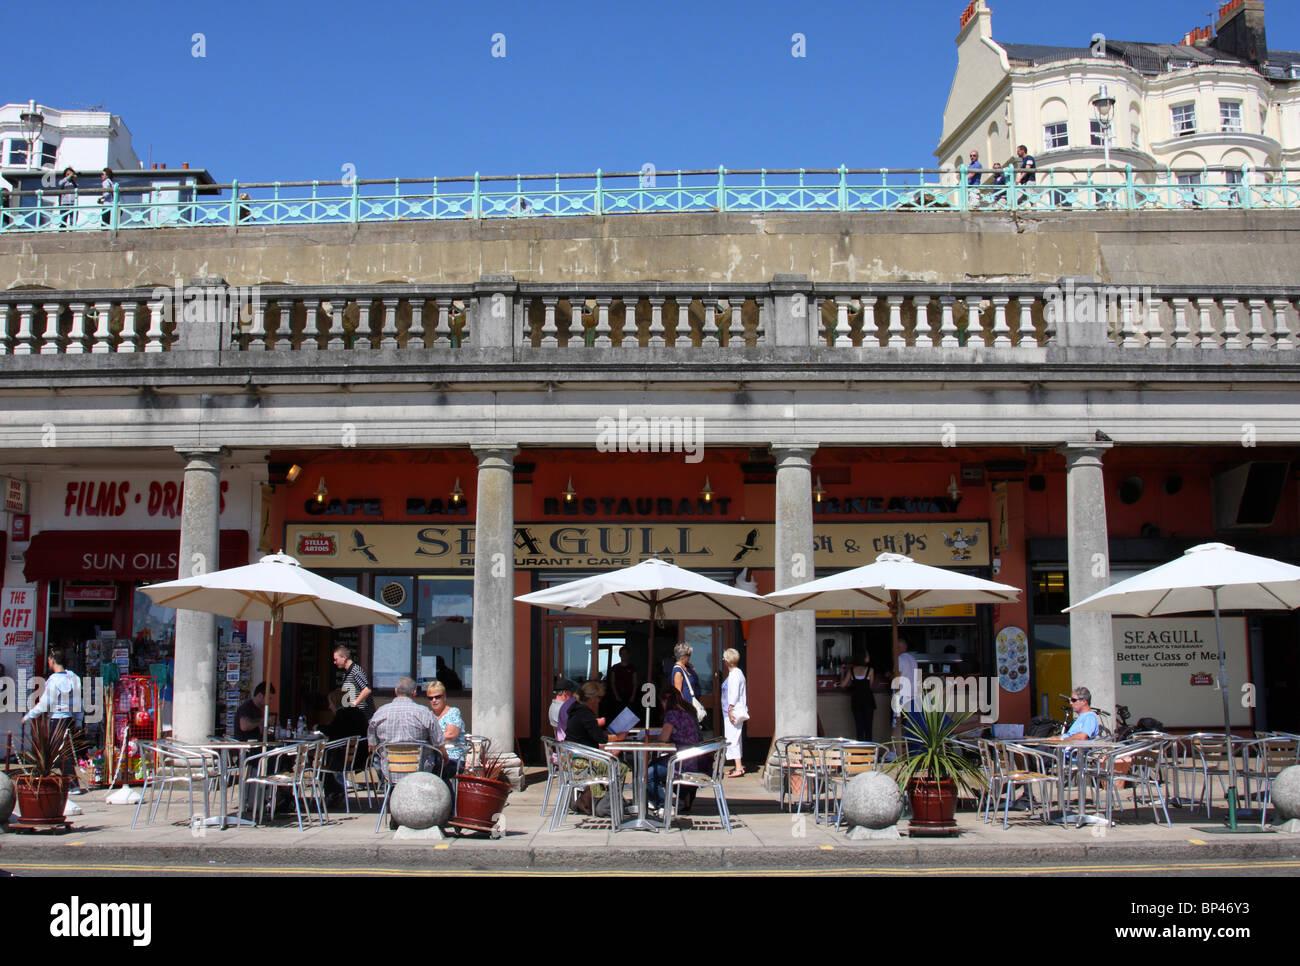 Le Seagull Cafe & Bar, Brighton, Angleterre, Royaume-Uni Banque D'Images